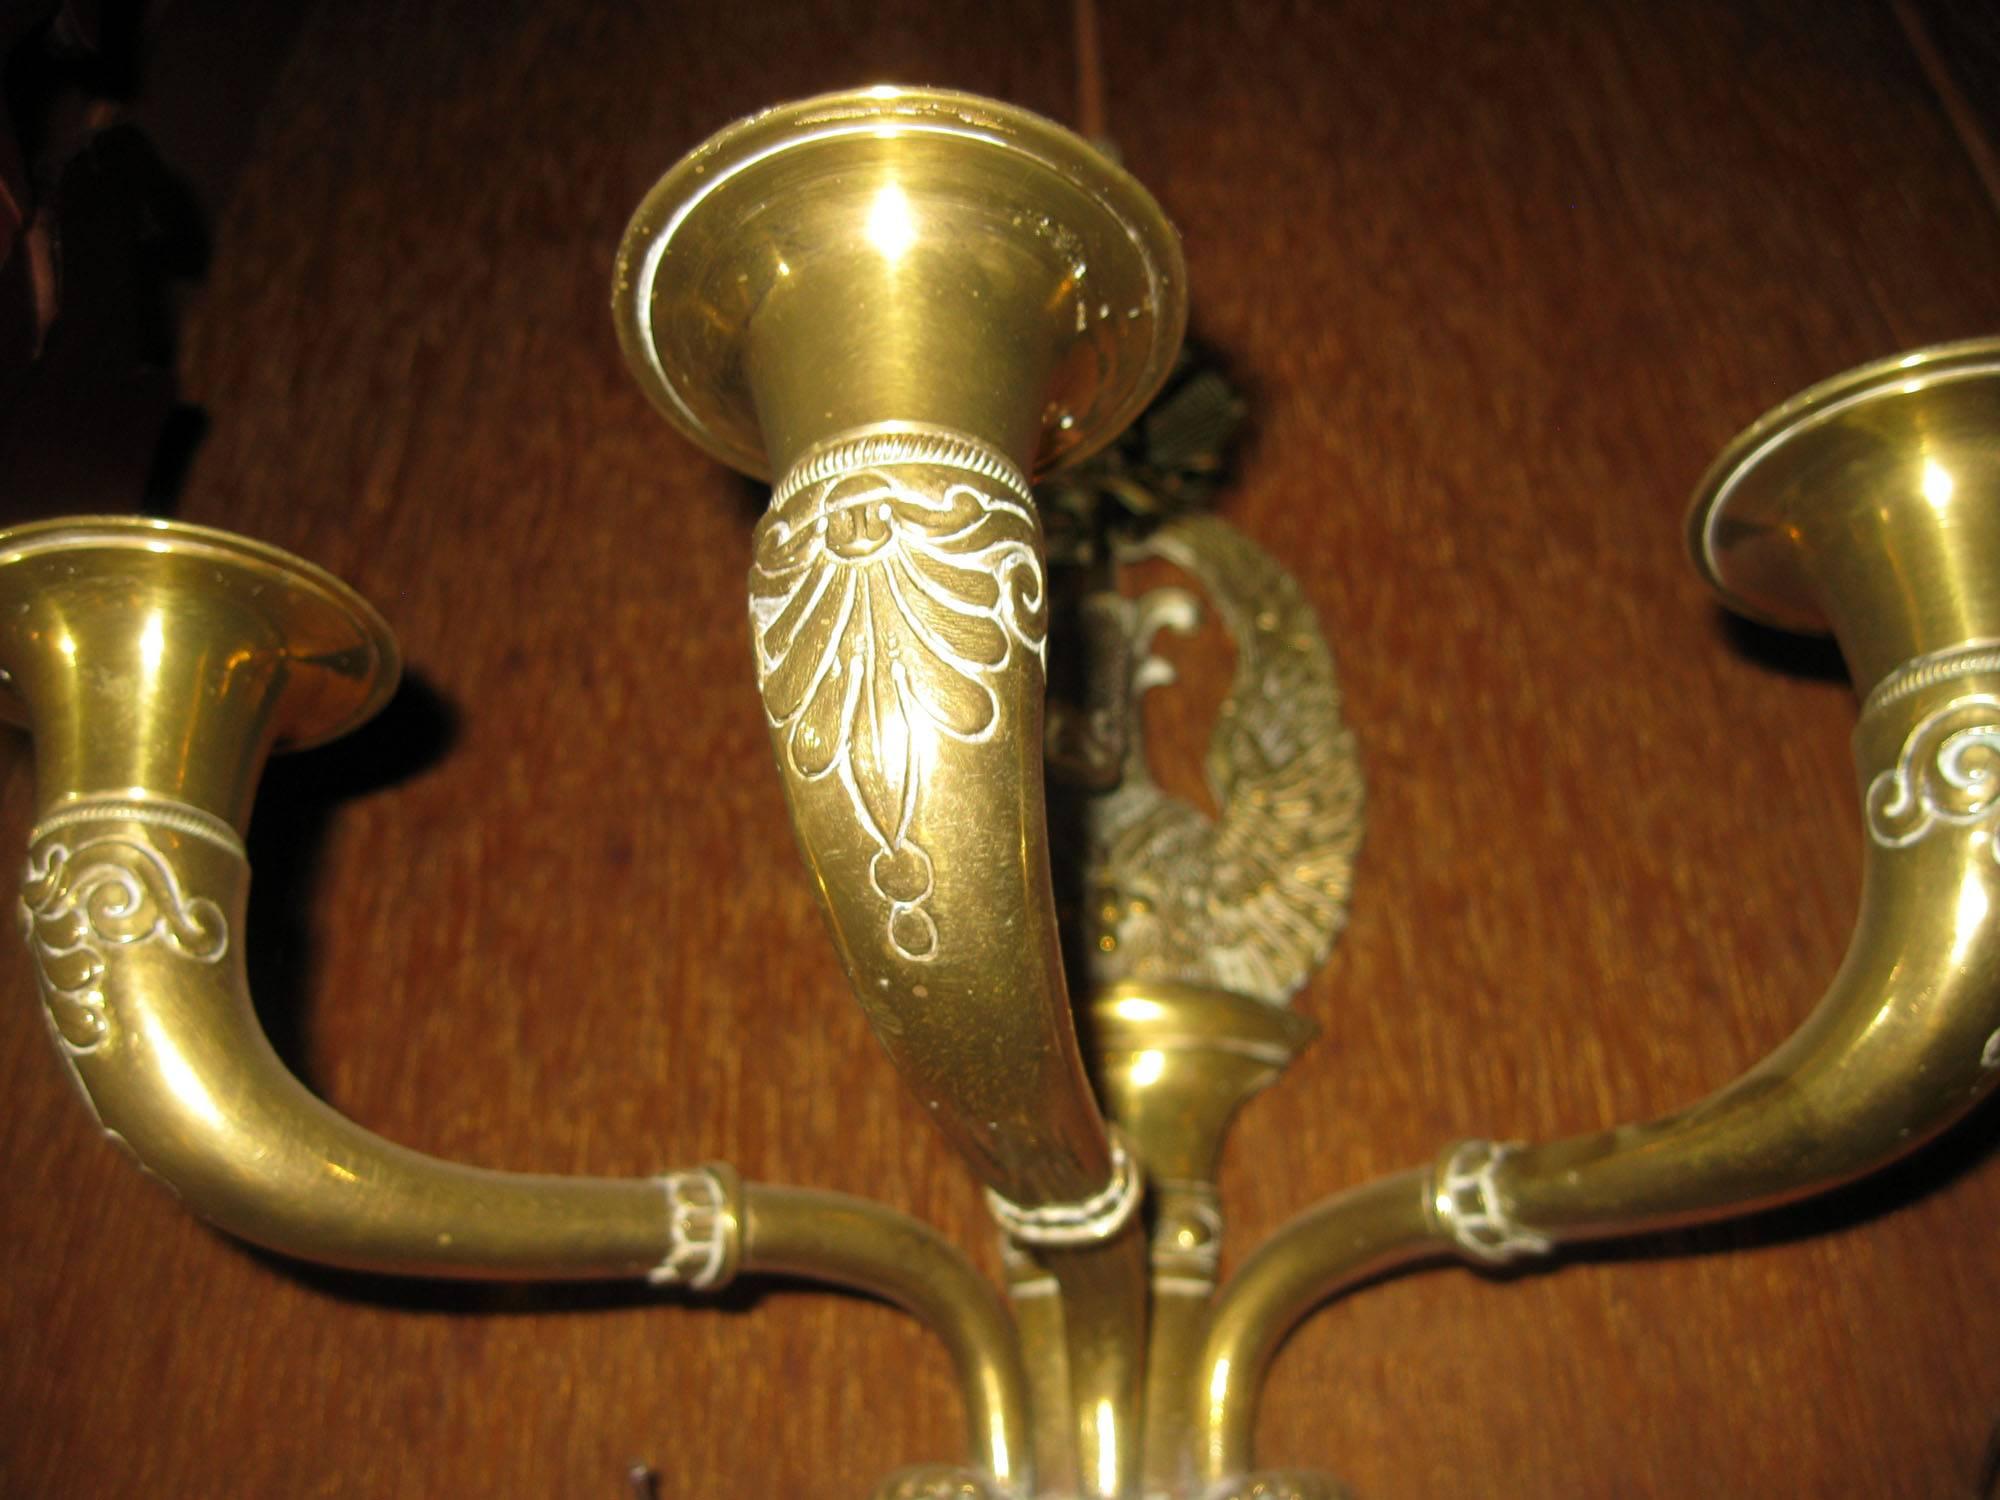 19th century French Empire Swan Motif Sconce Pair In Good Condition For Sale In Savannah, GA